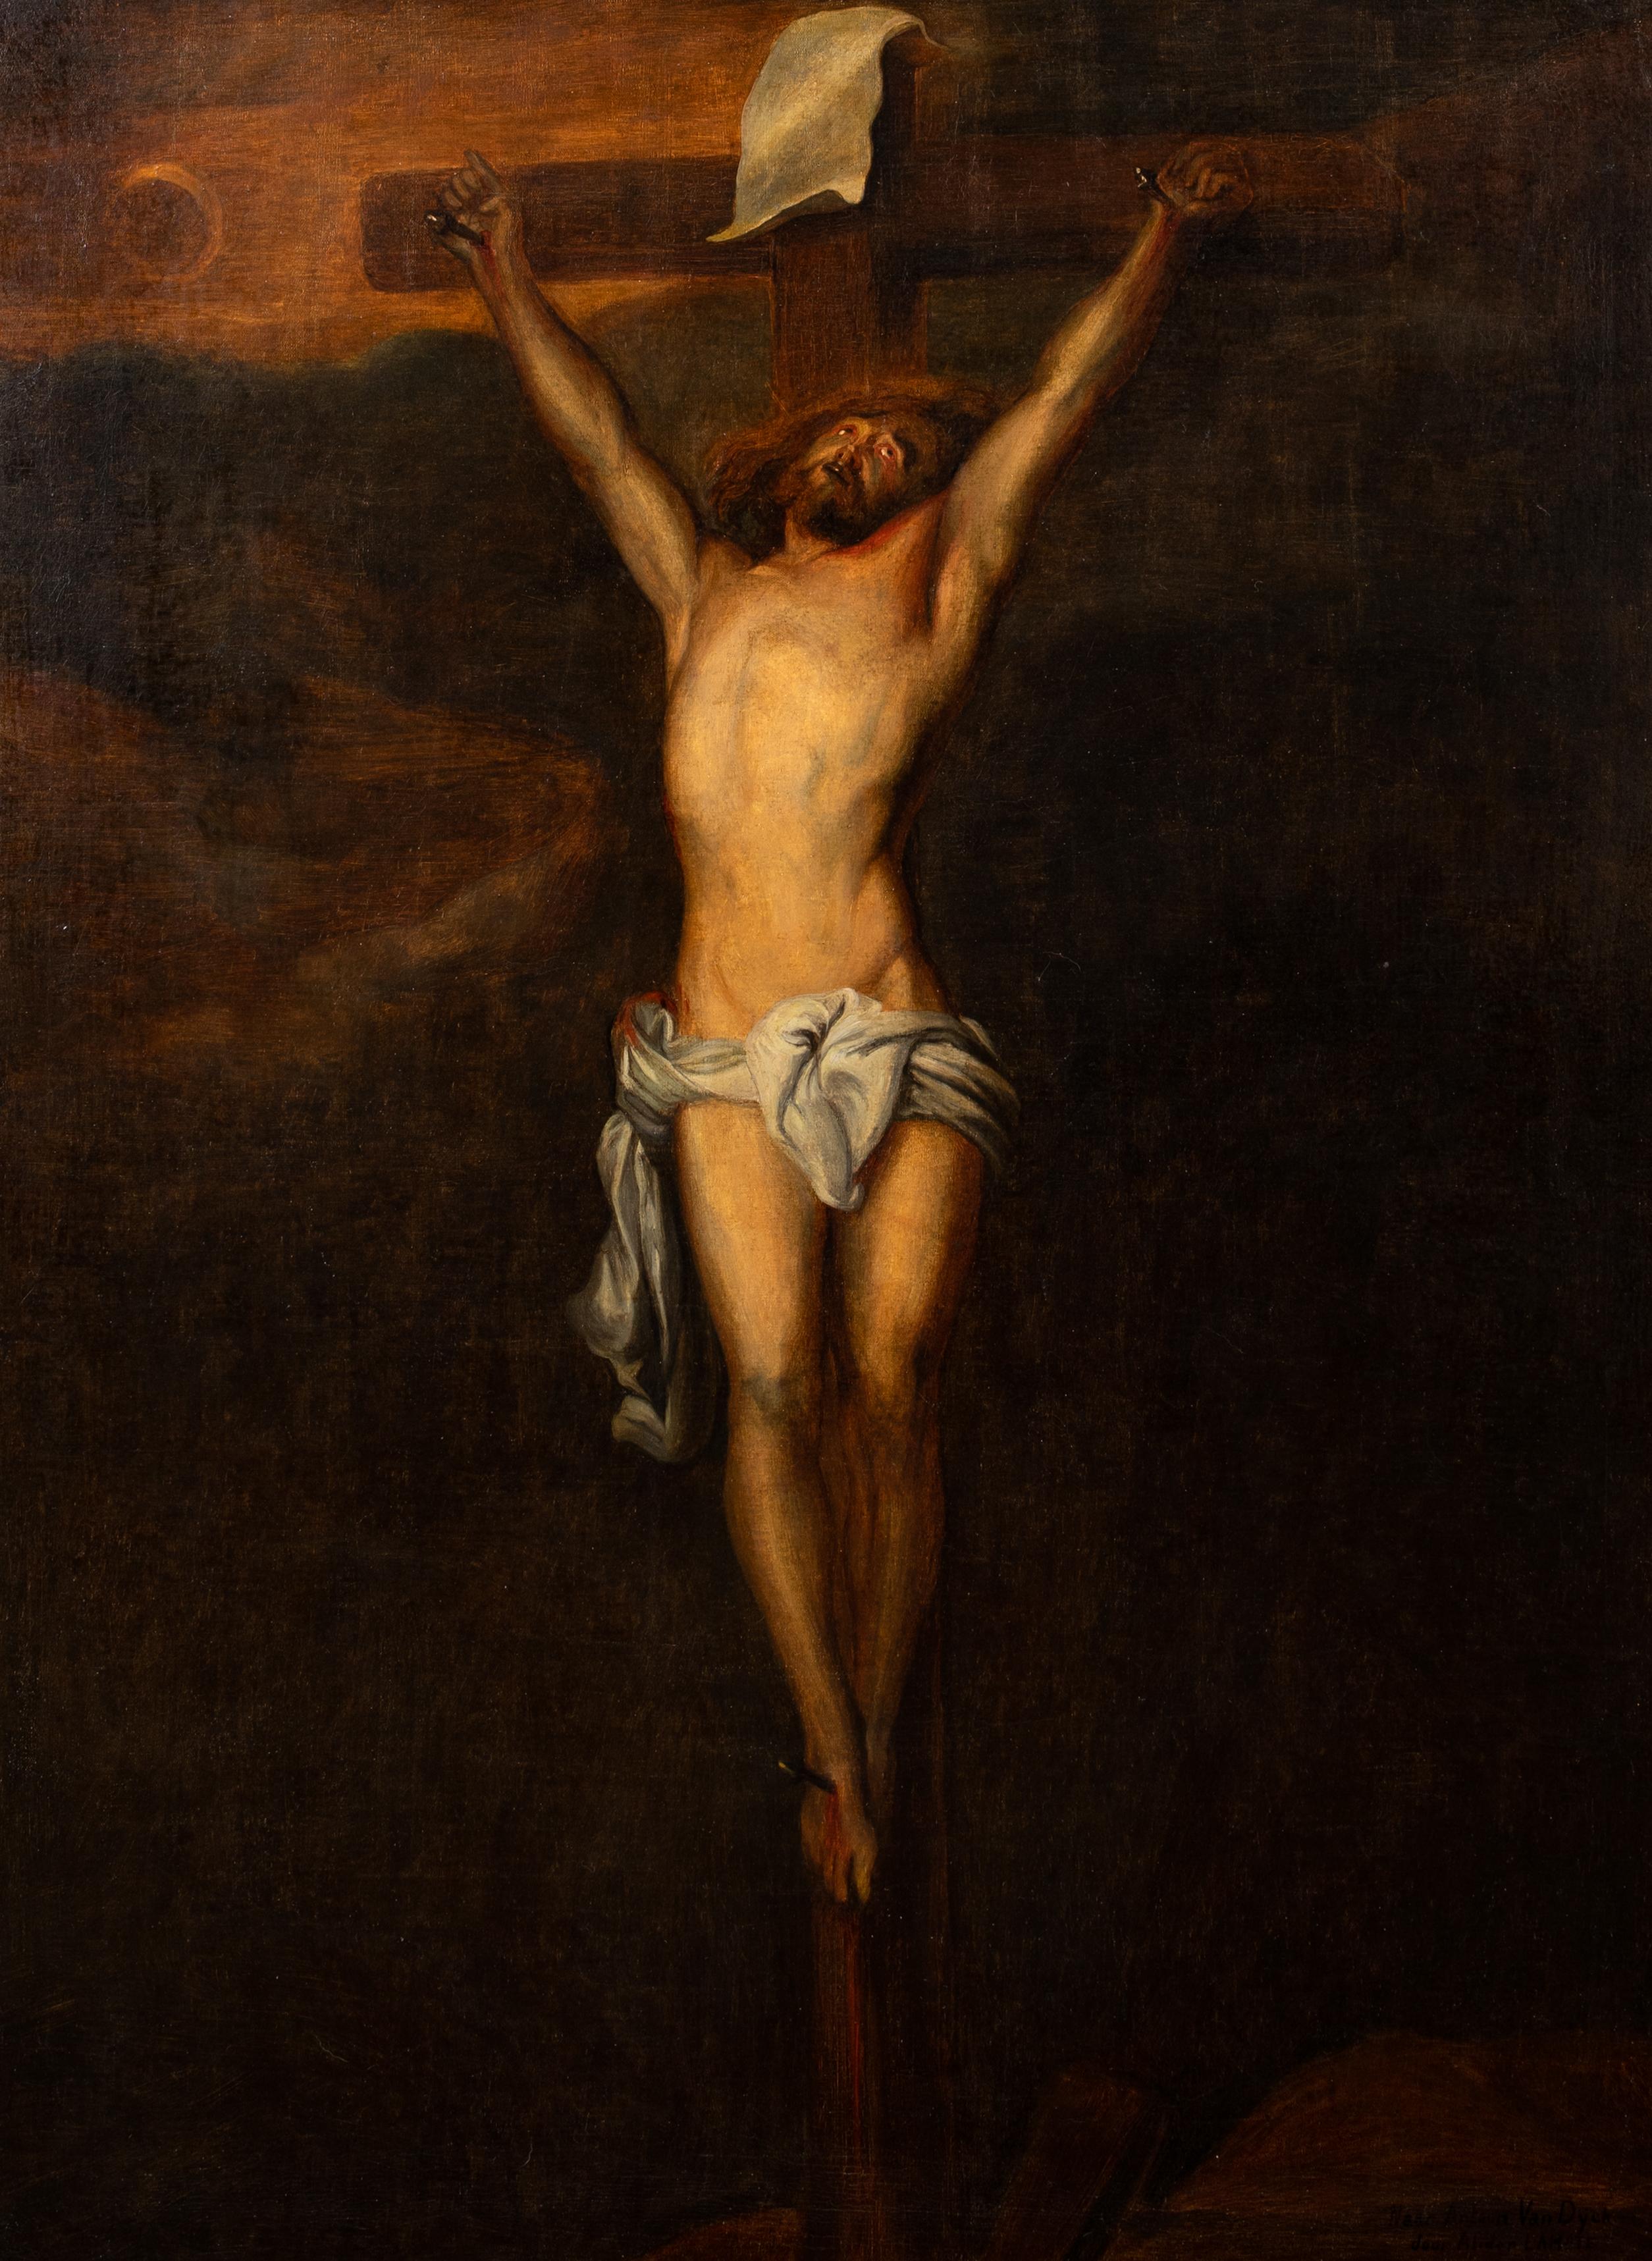 The Crucifixion, 17th Century 

circle of Anthony VAN DYCK (1599-1641)

Huge 17th Century Dutch Old Master depiction of the Crucifixion, oil on canvas. Excellent quality large scale depiction of Christ upon the cross distinctly similar to the works